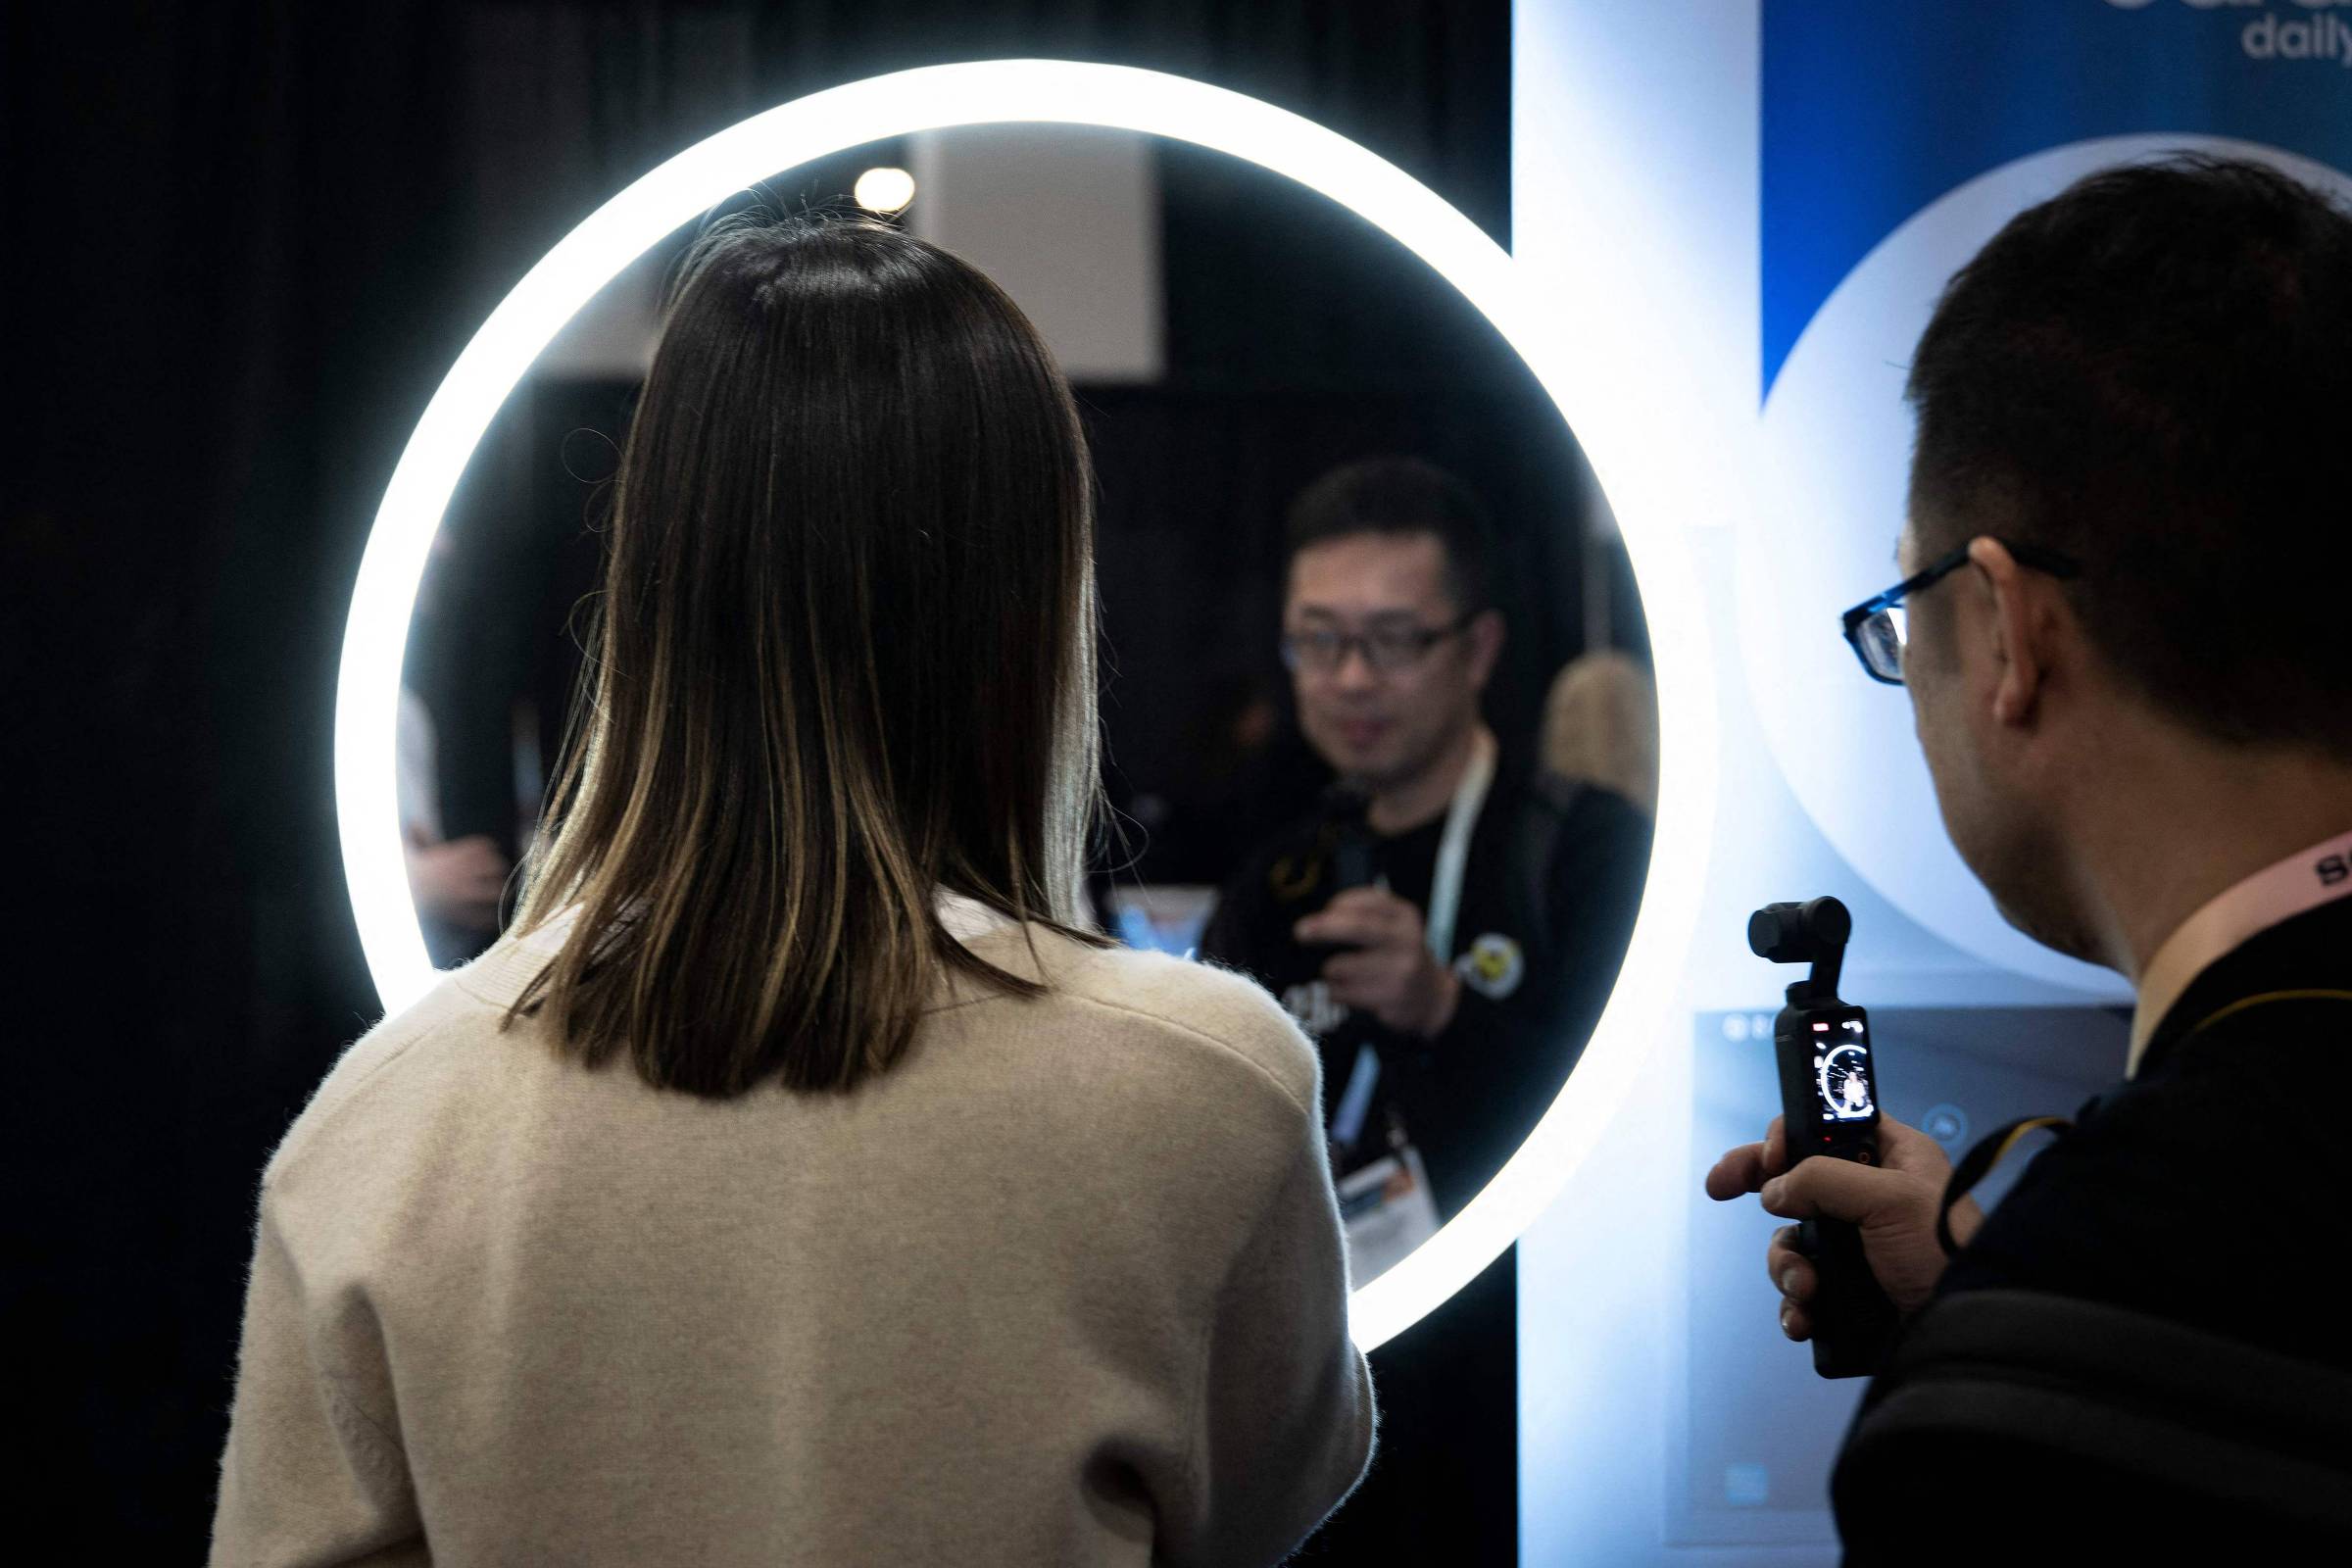 Mirror that assesses disease risk and AI-powered baby stroller are attractions at CES